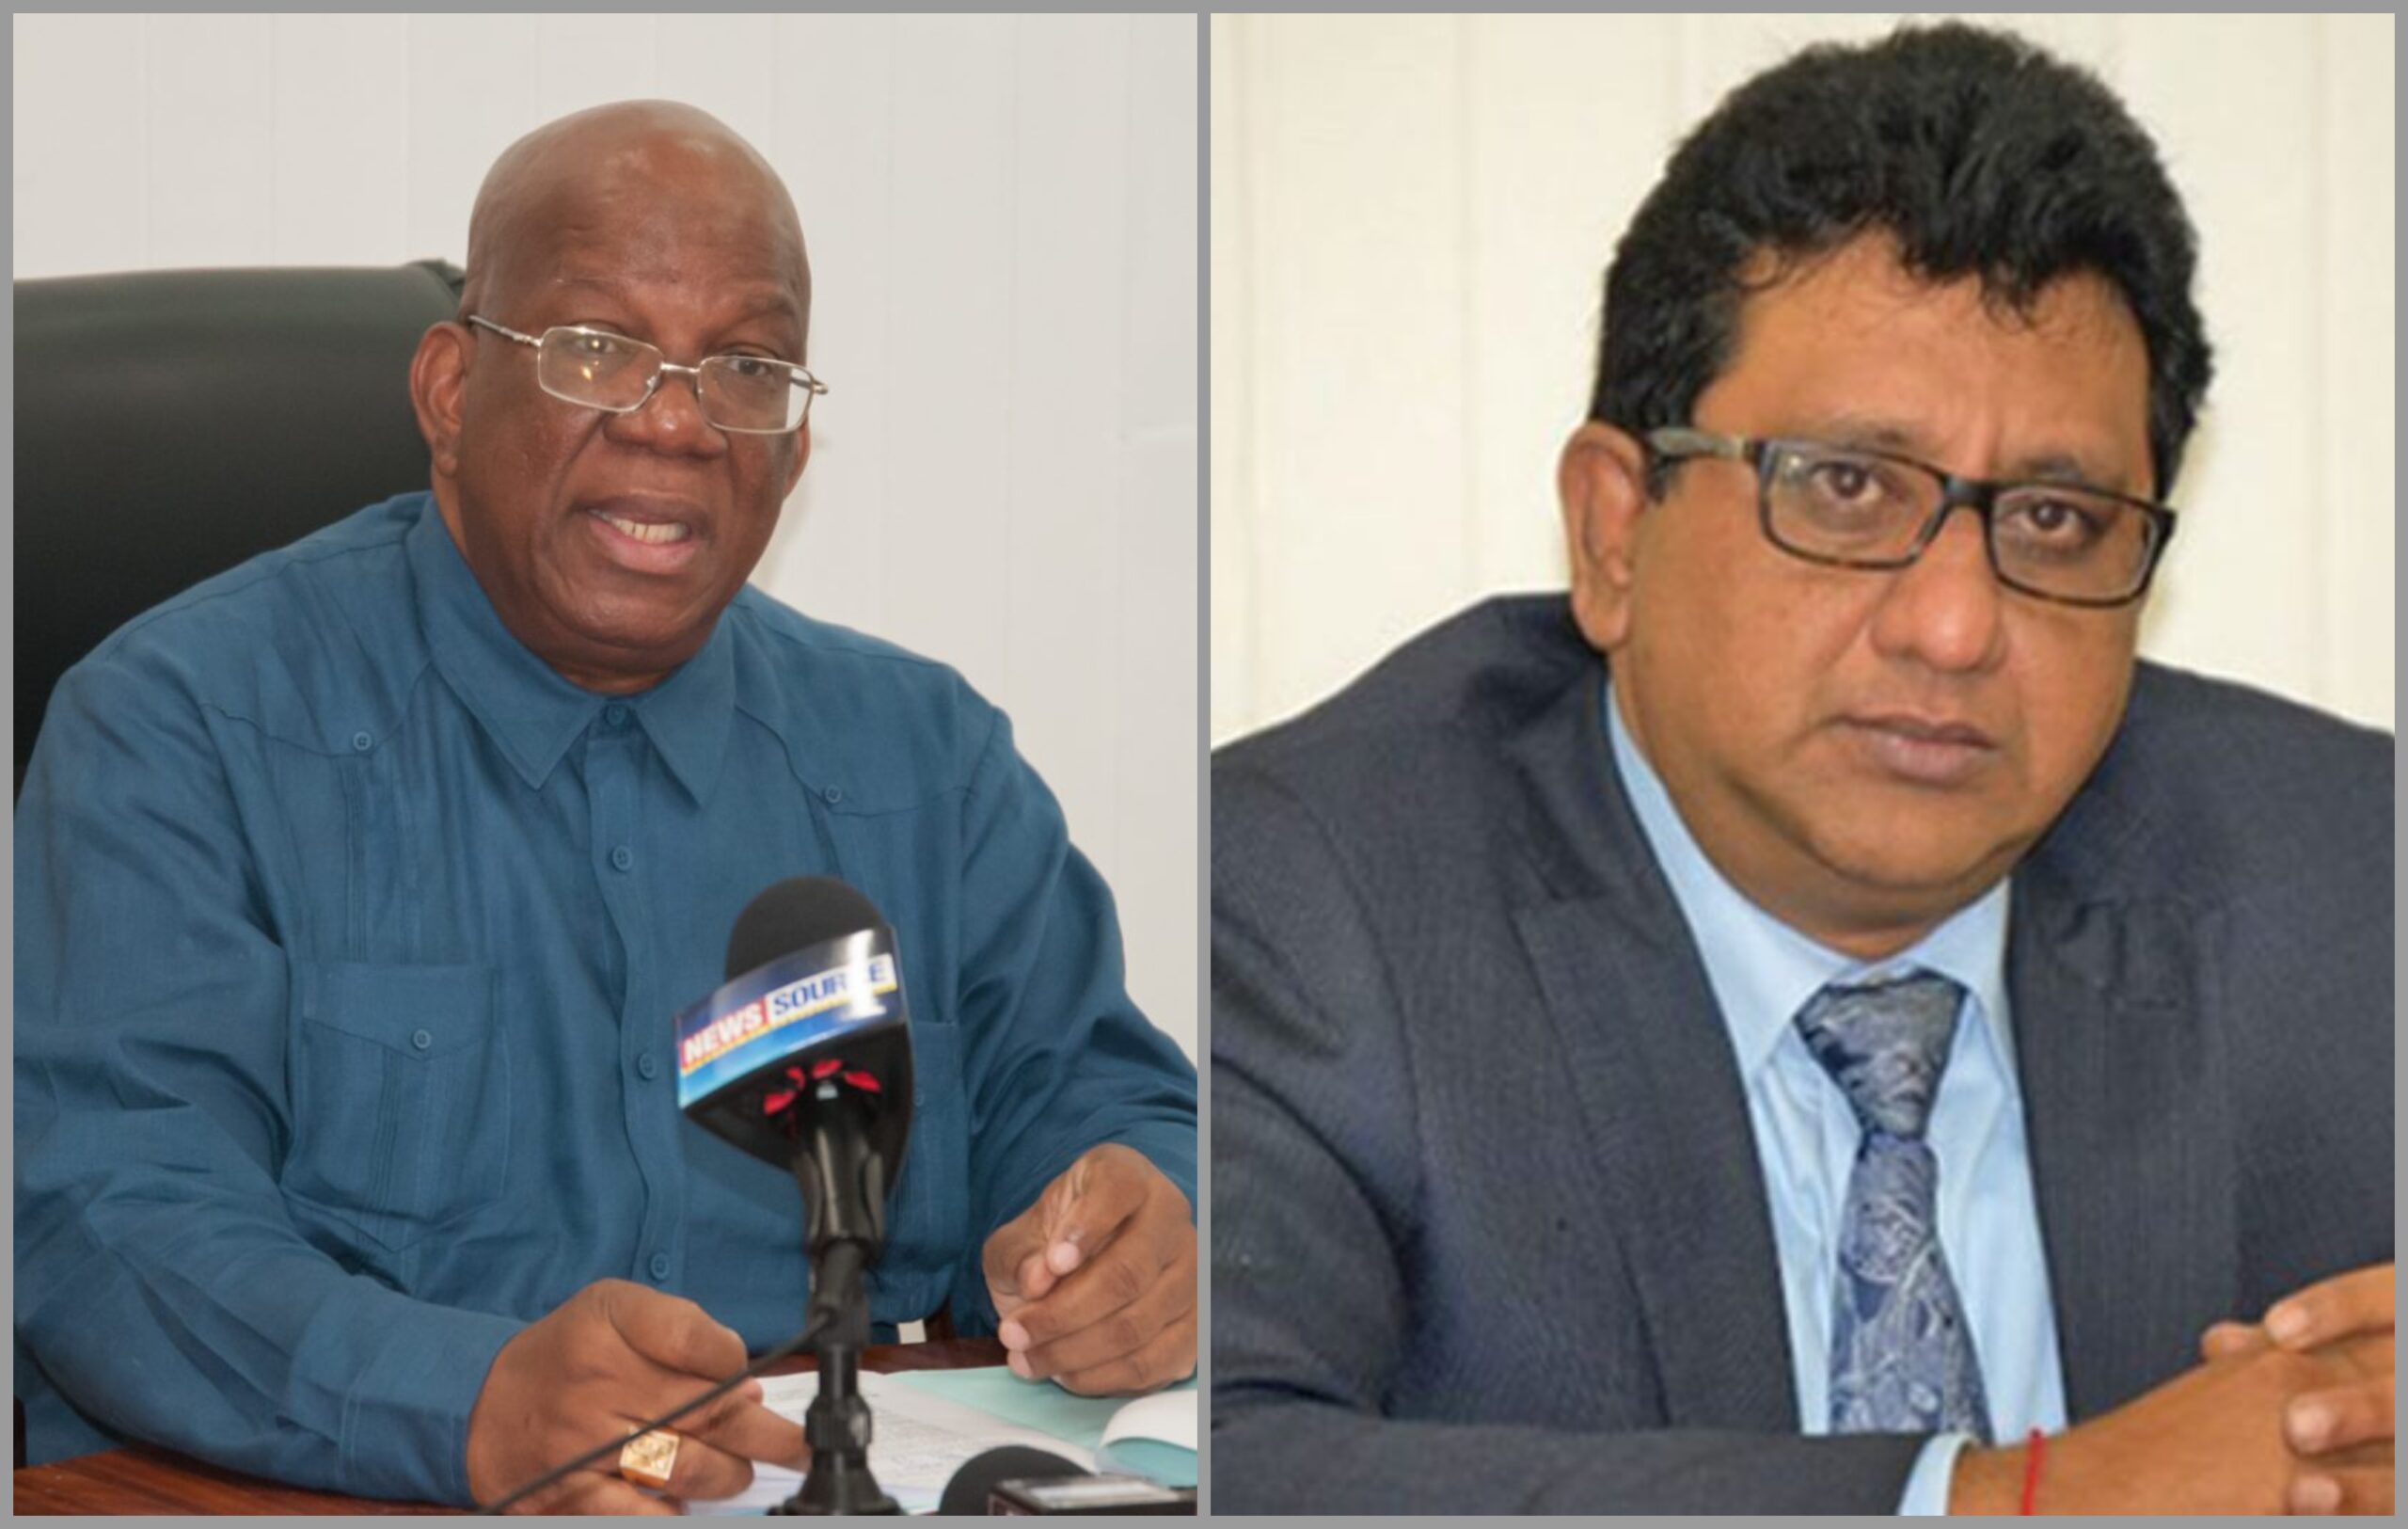 Former Minister of Finance, Winston Jordan and Attorney General, Anil Nandlall